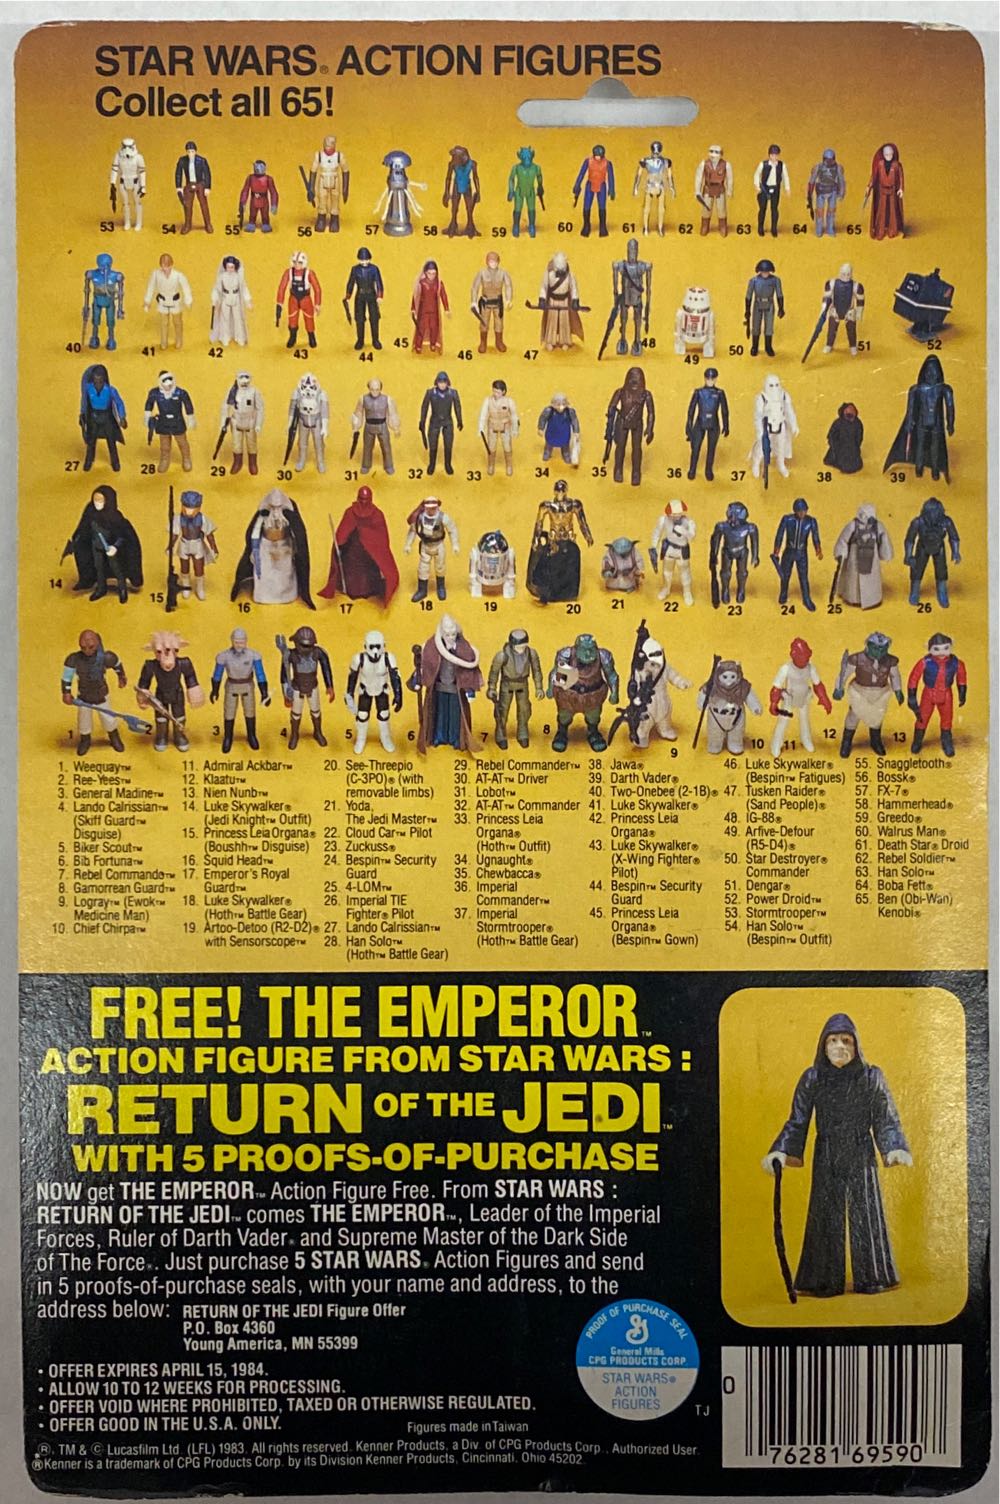 Ree-Yees - Kenner (Return Of The Jedi) action figure collectible [Barcode 076281695907] - Main Image 2